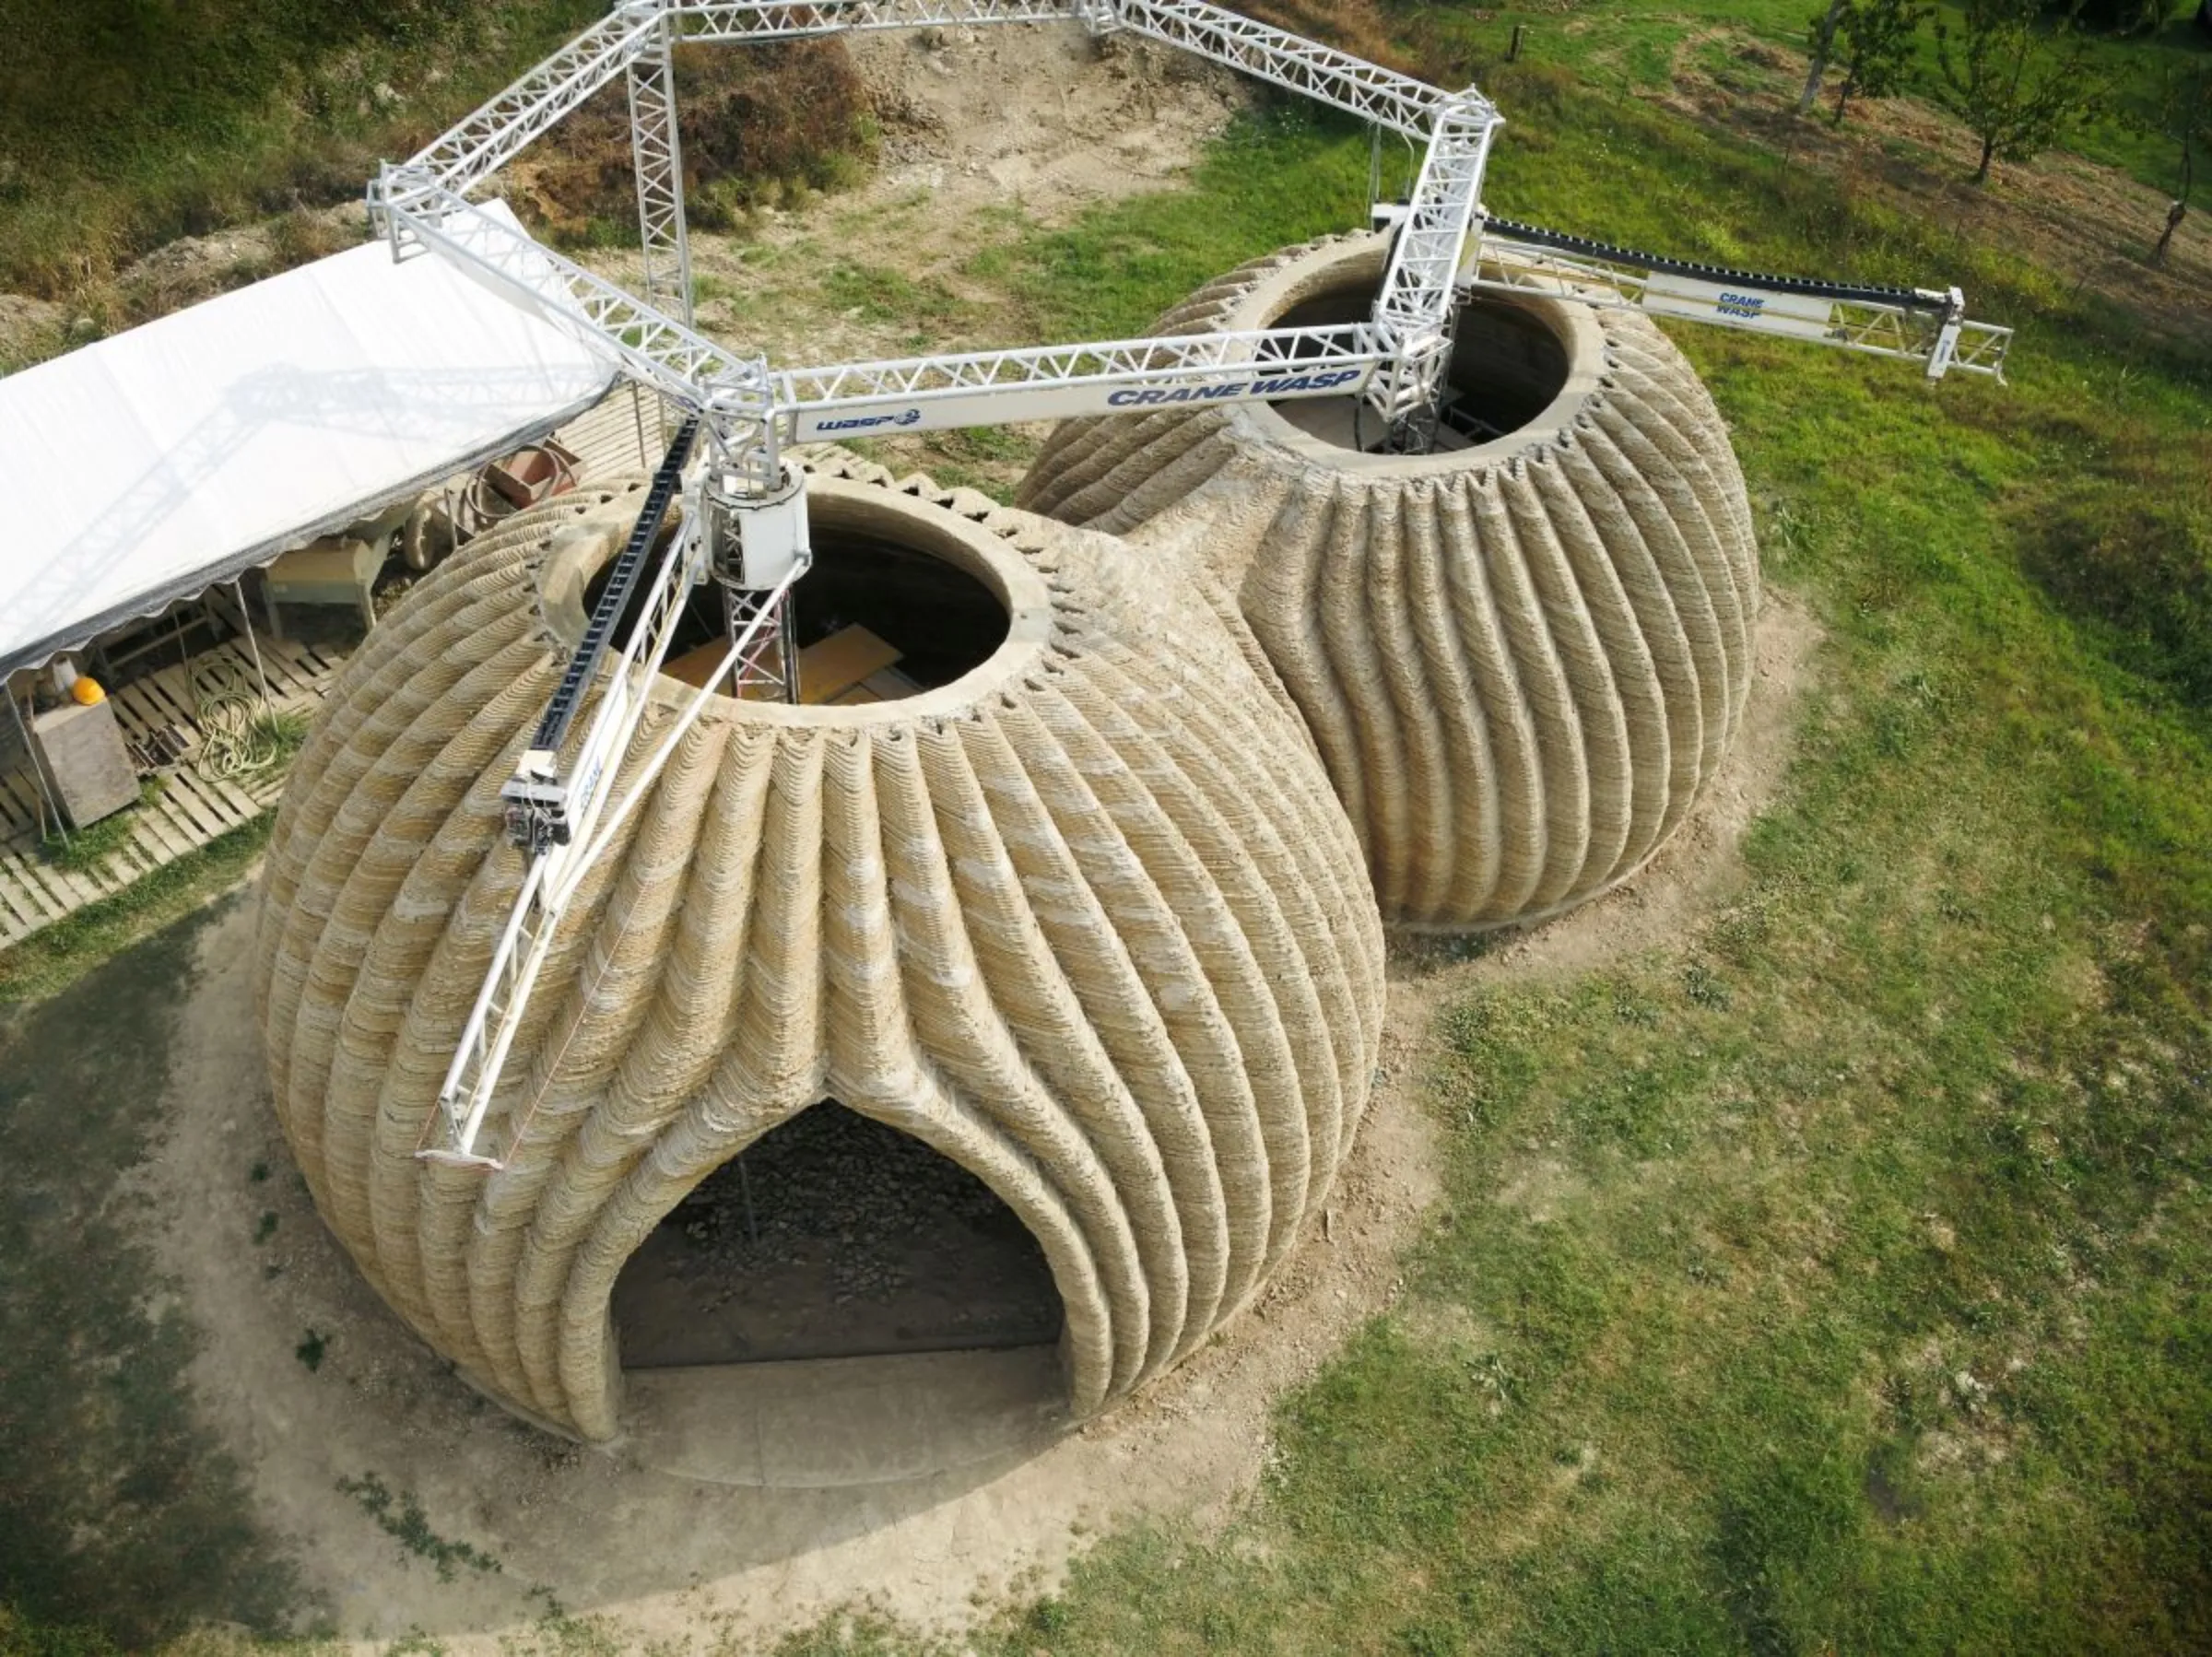 An eco-friendly 3D-printed house known as TECLA, made entirely of sustainable recyclable materials sourced from local soil by Italian 3D print manufacturers WASP, is seen in Ravenna, Italy, January 20, 2021. TECLA 3D printed house by WASP/Handout via REUTERS